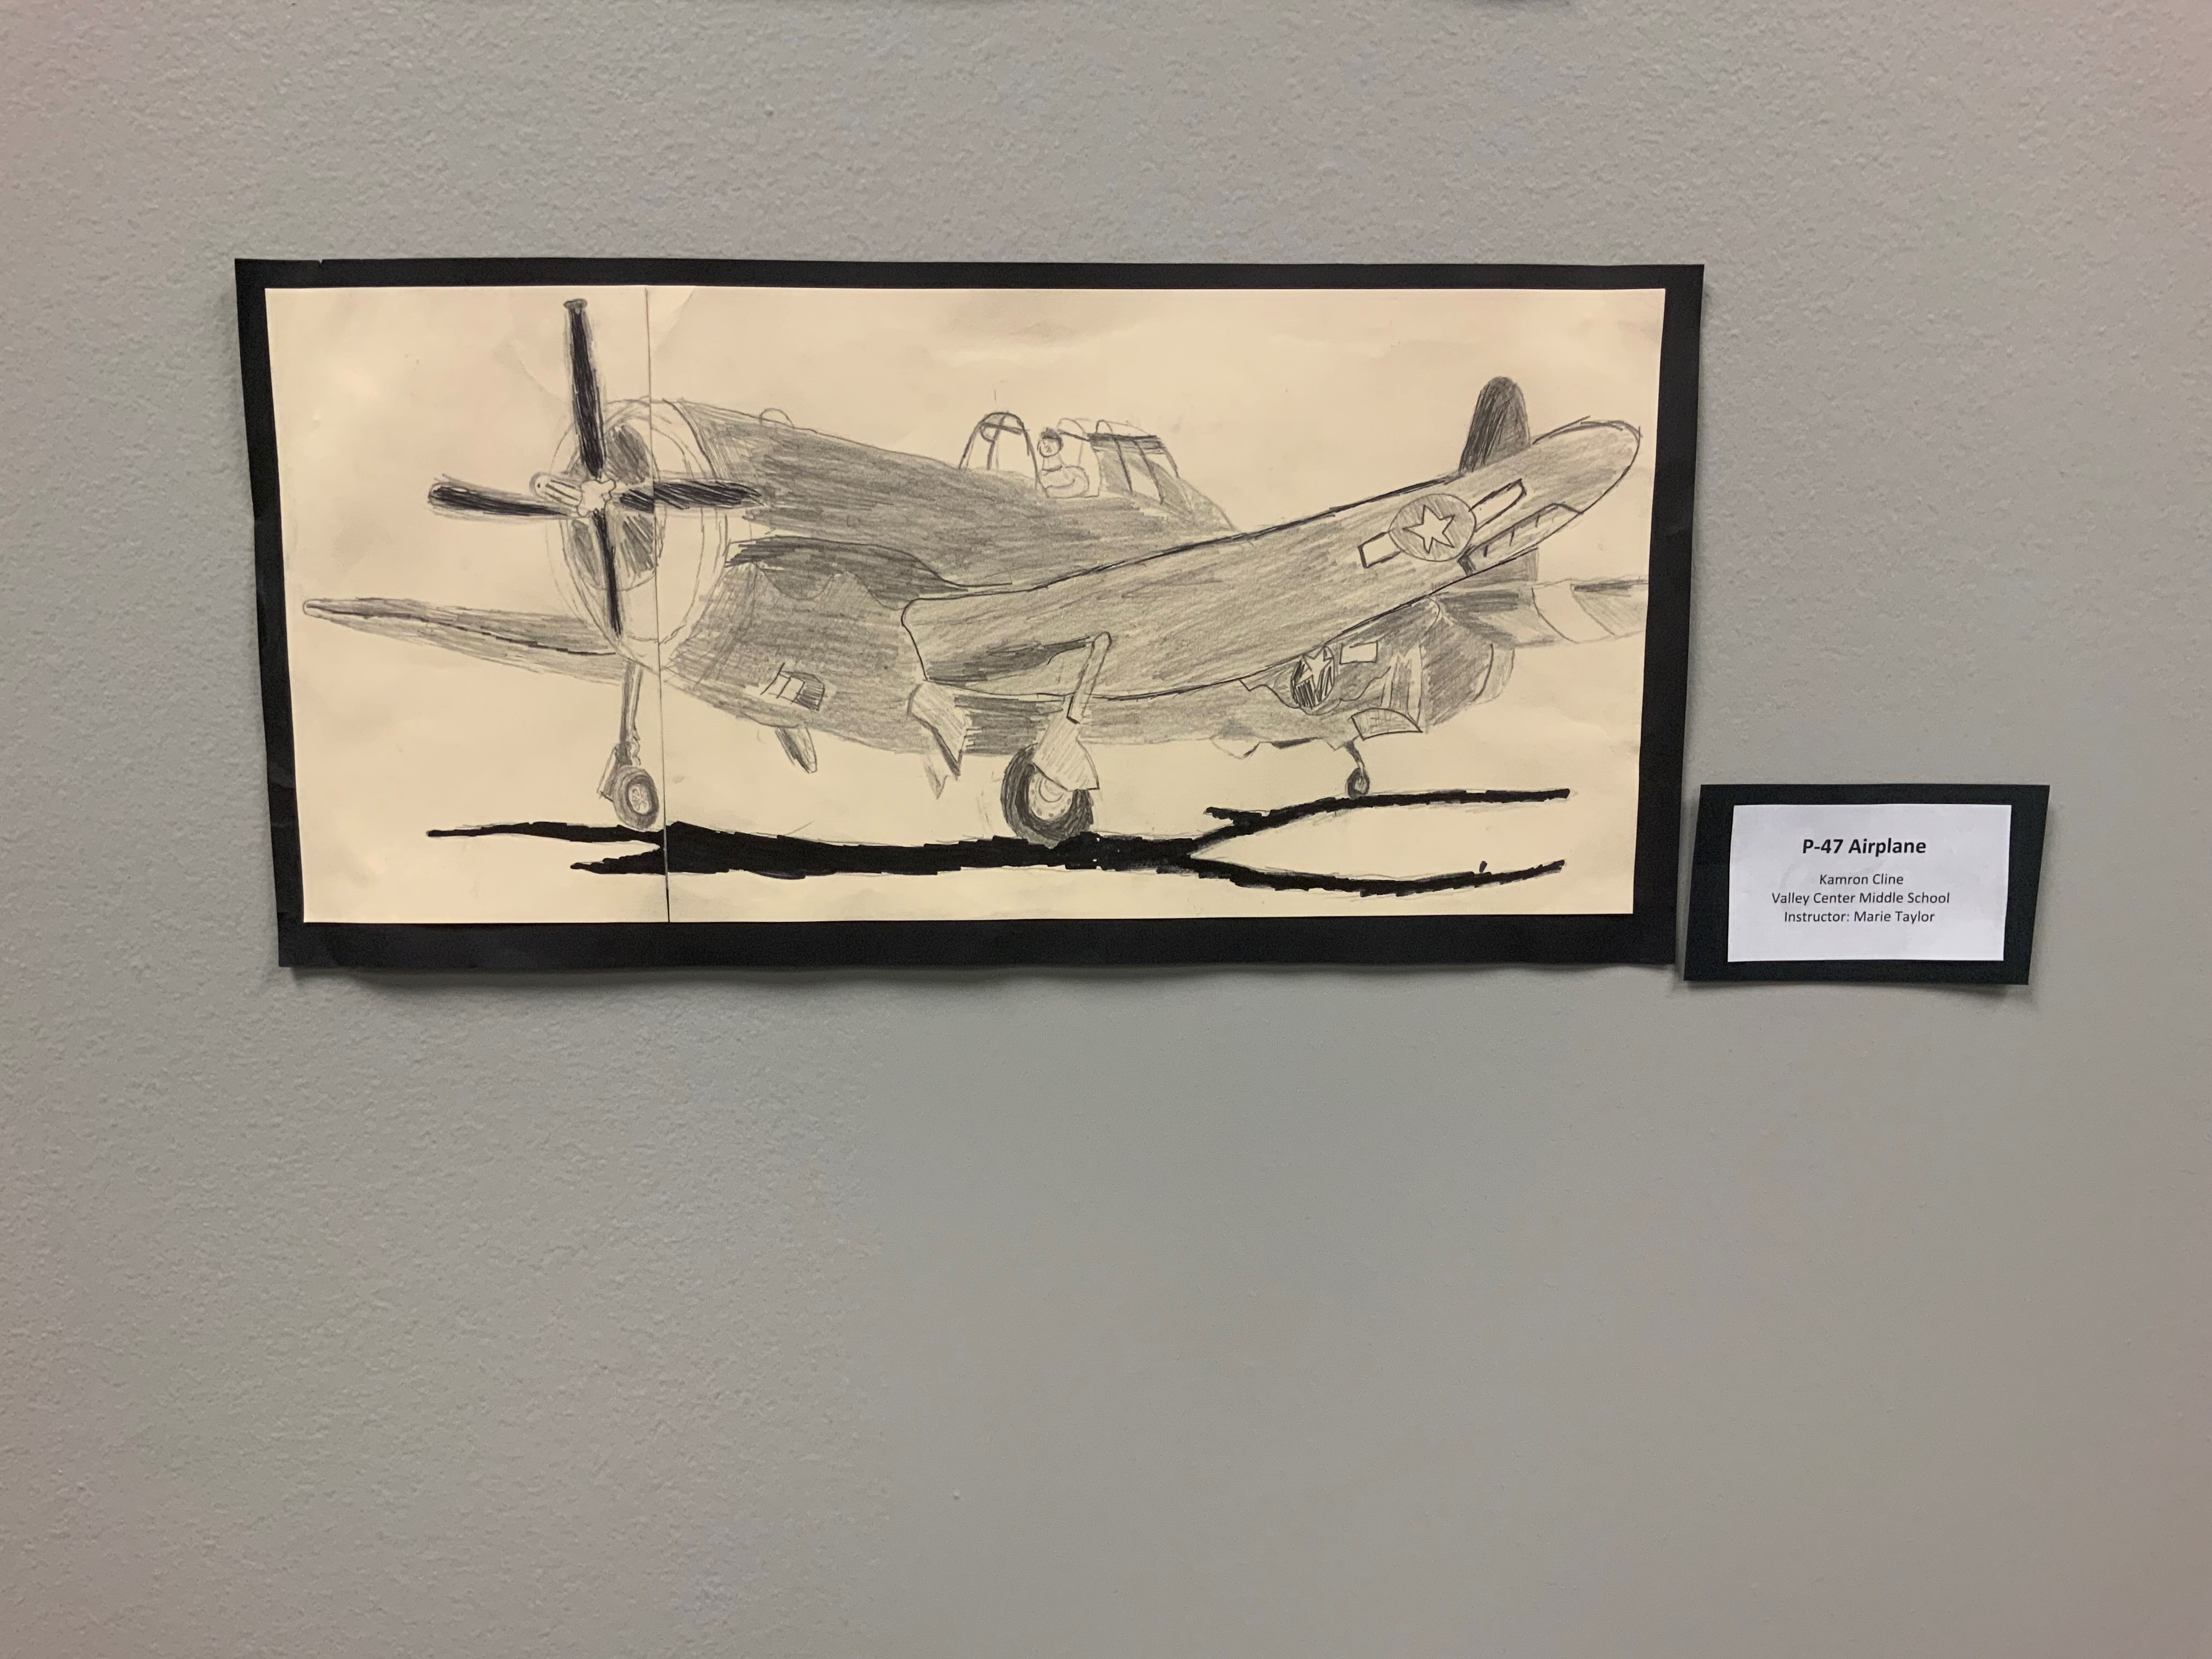 P-47 Airplane by Kamron Cline